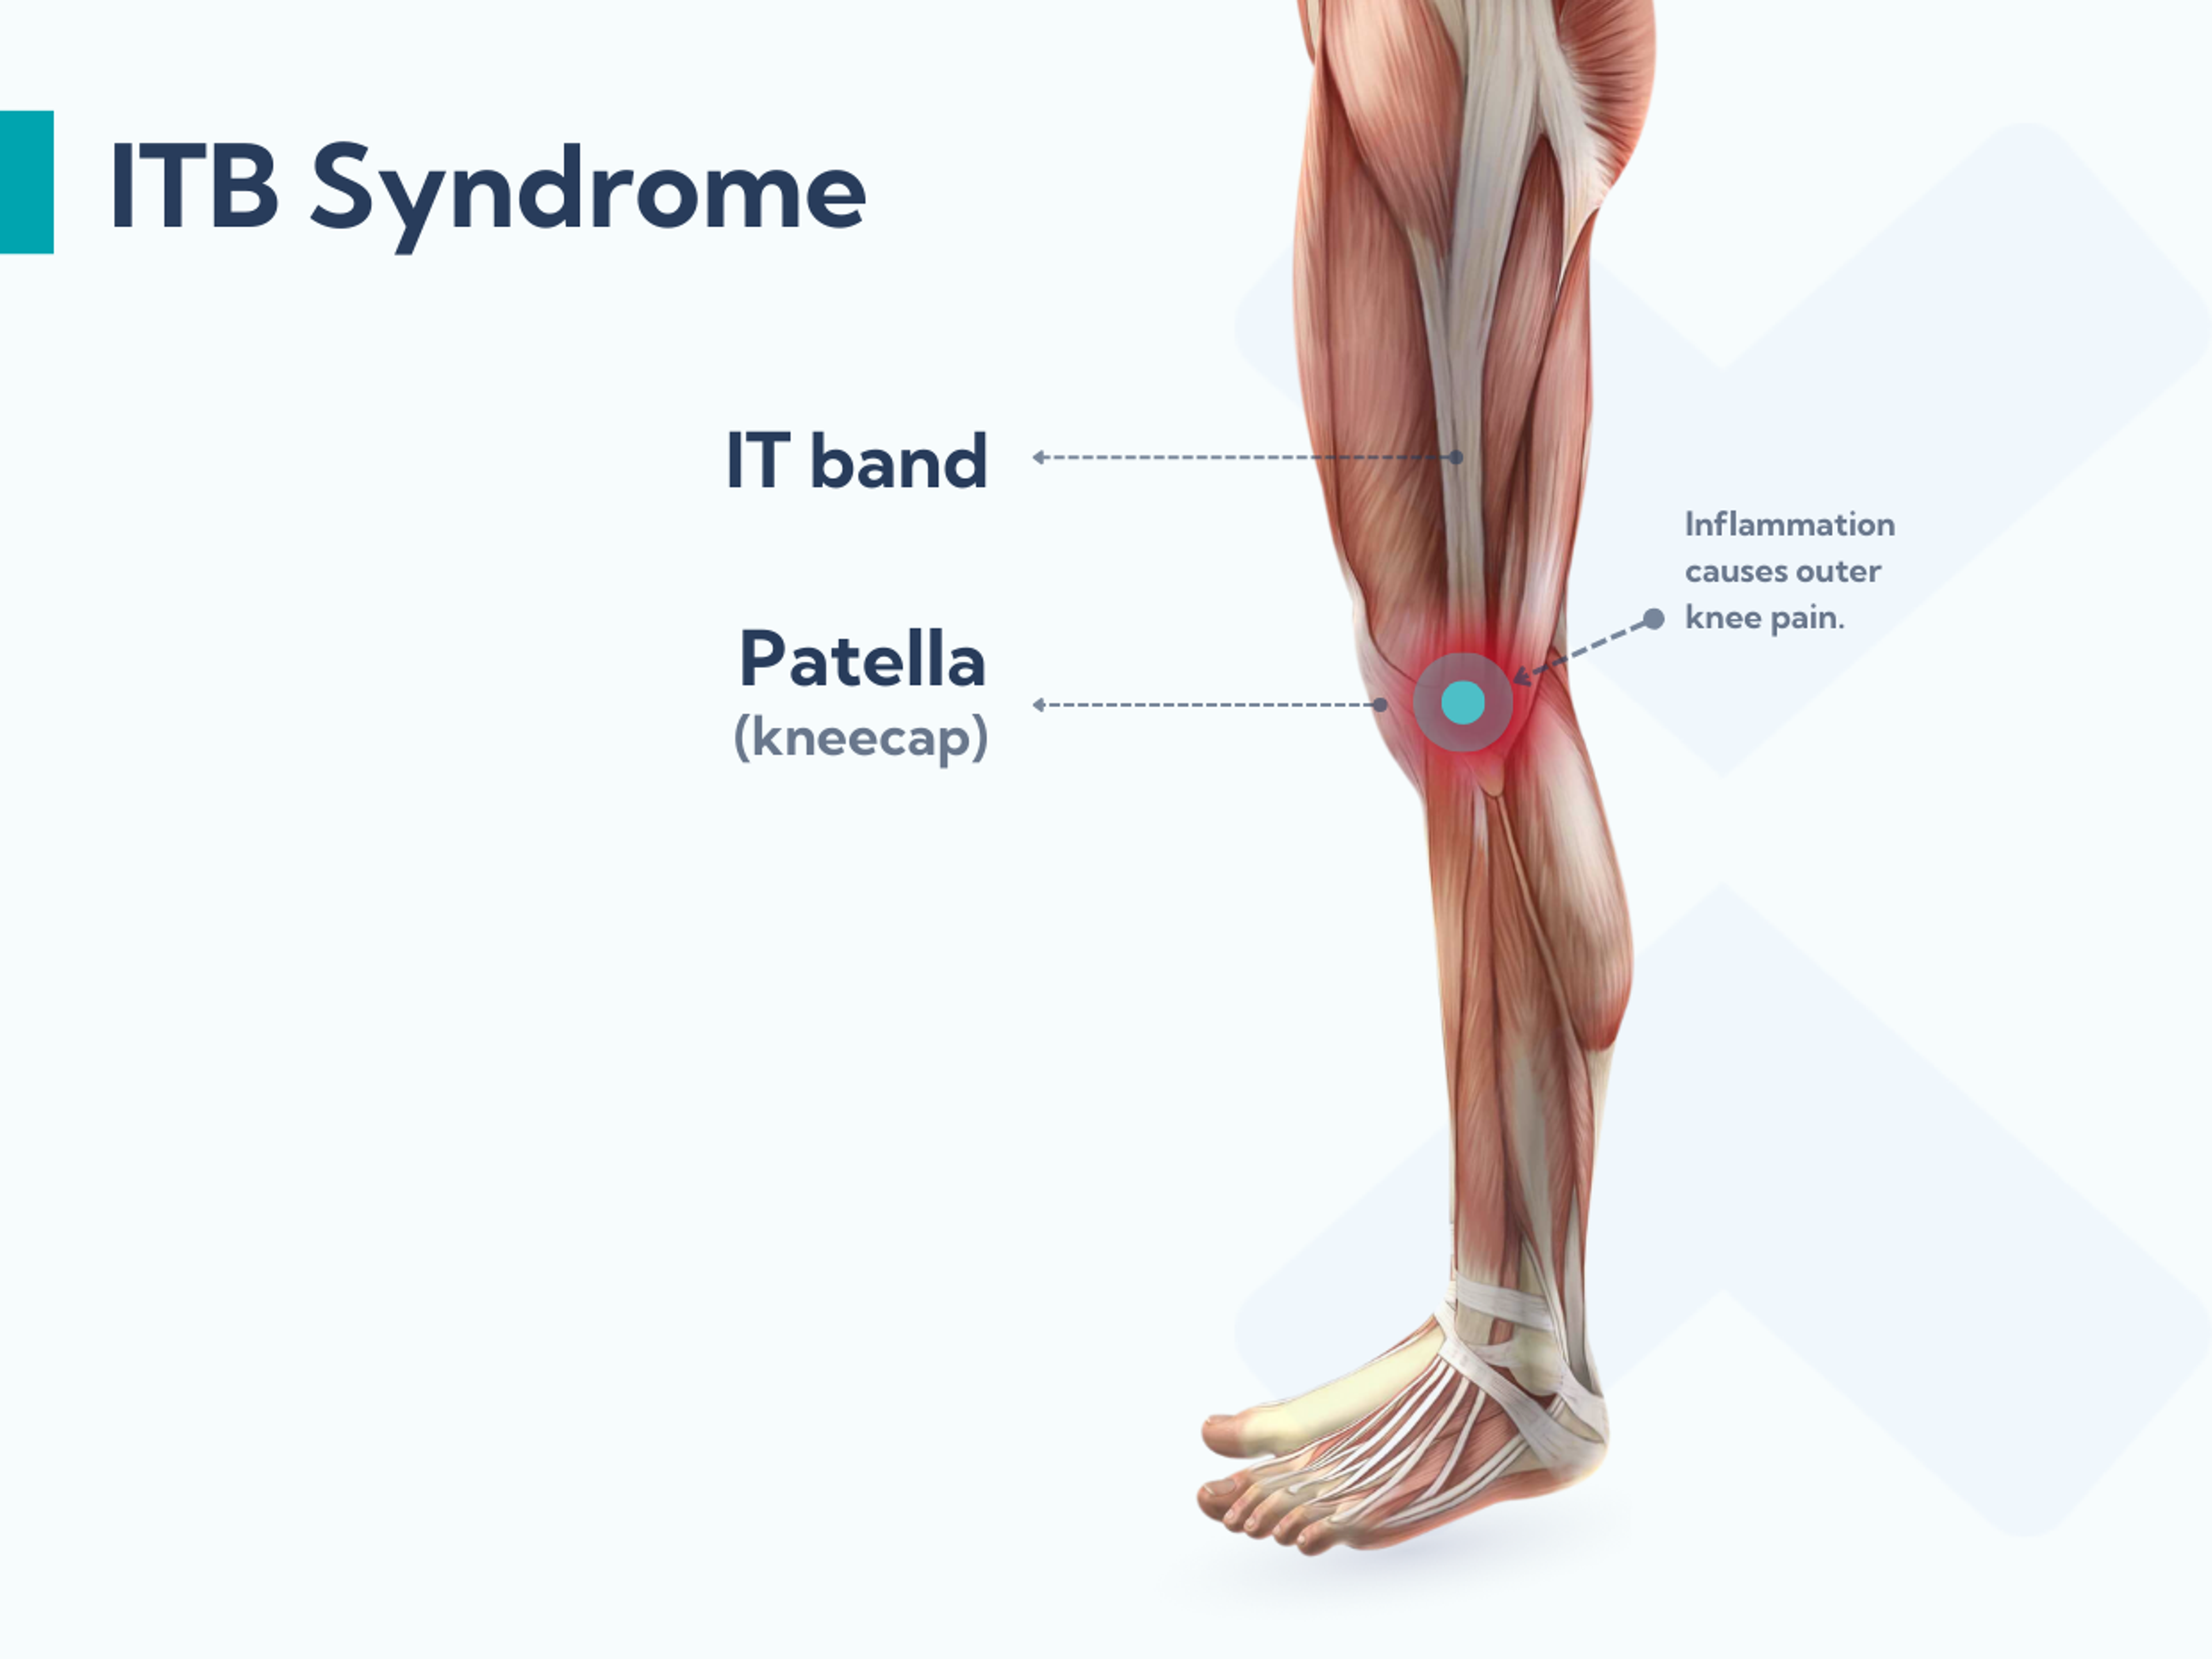 Iliotibial band syndrome is caused by irritation and inflammation in the area where the IT band attaches to the outer knee.